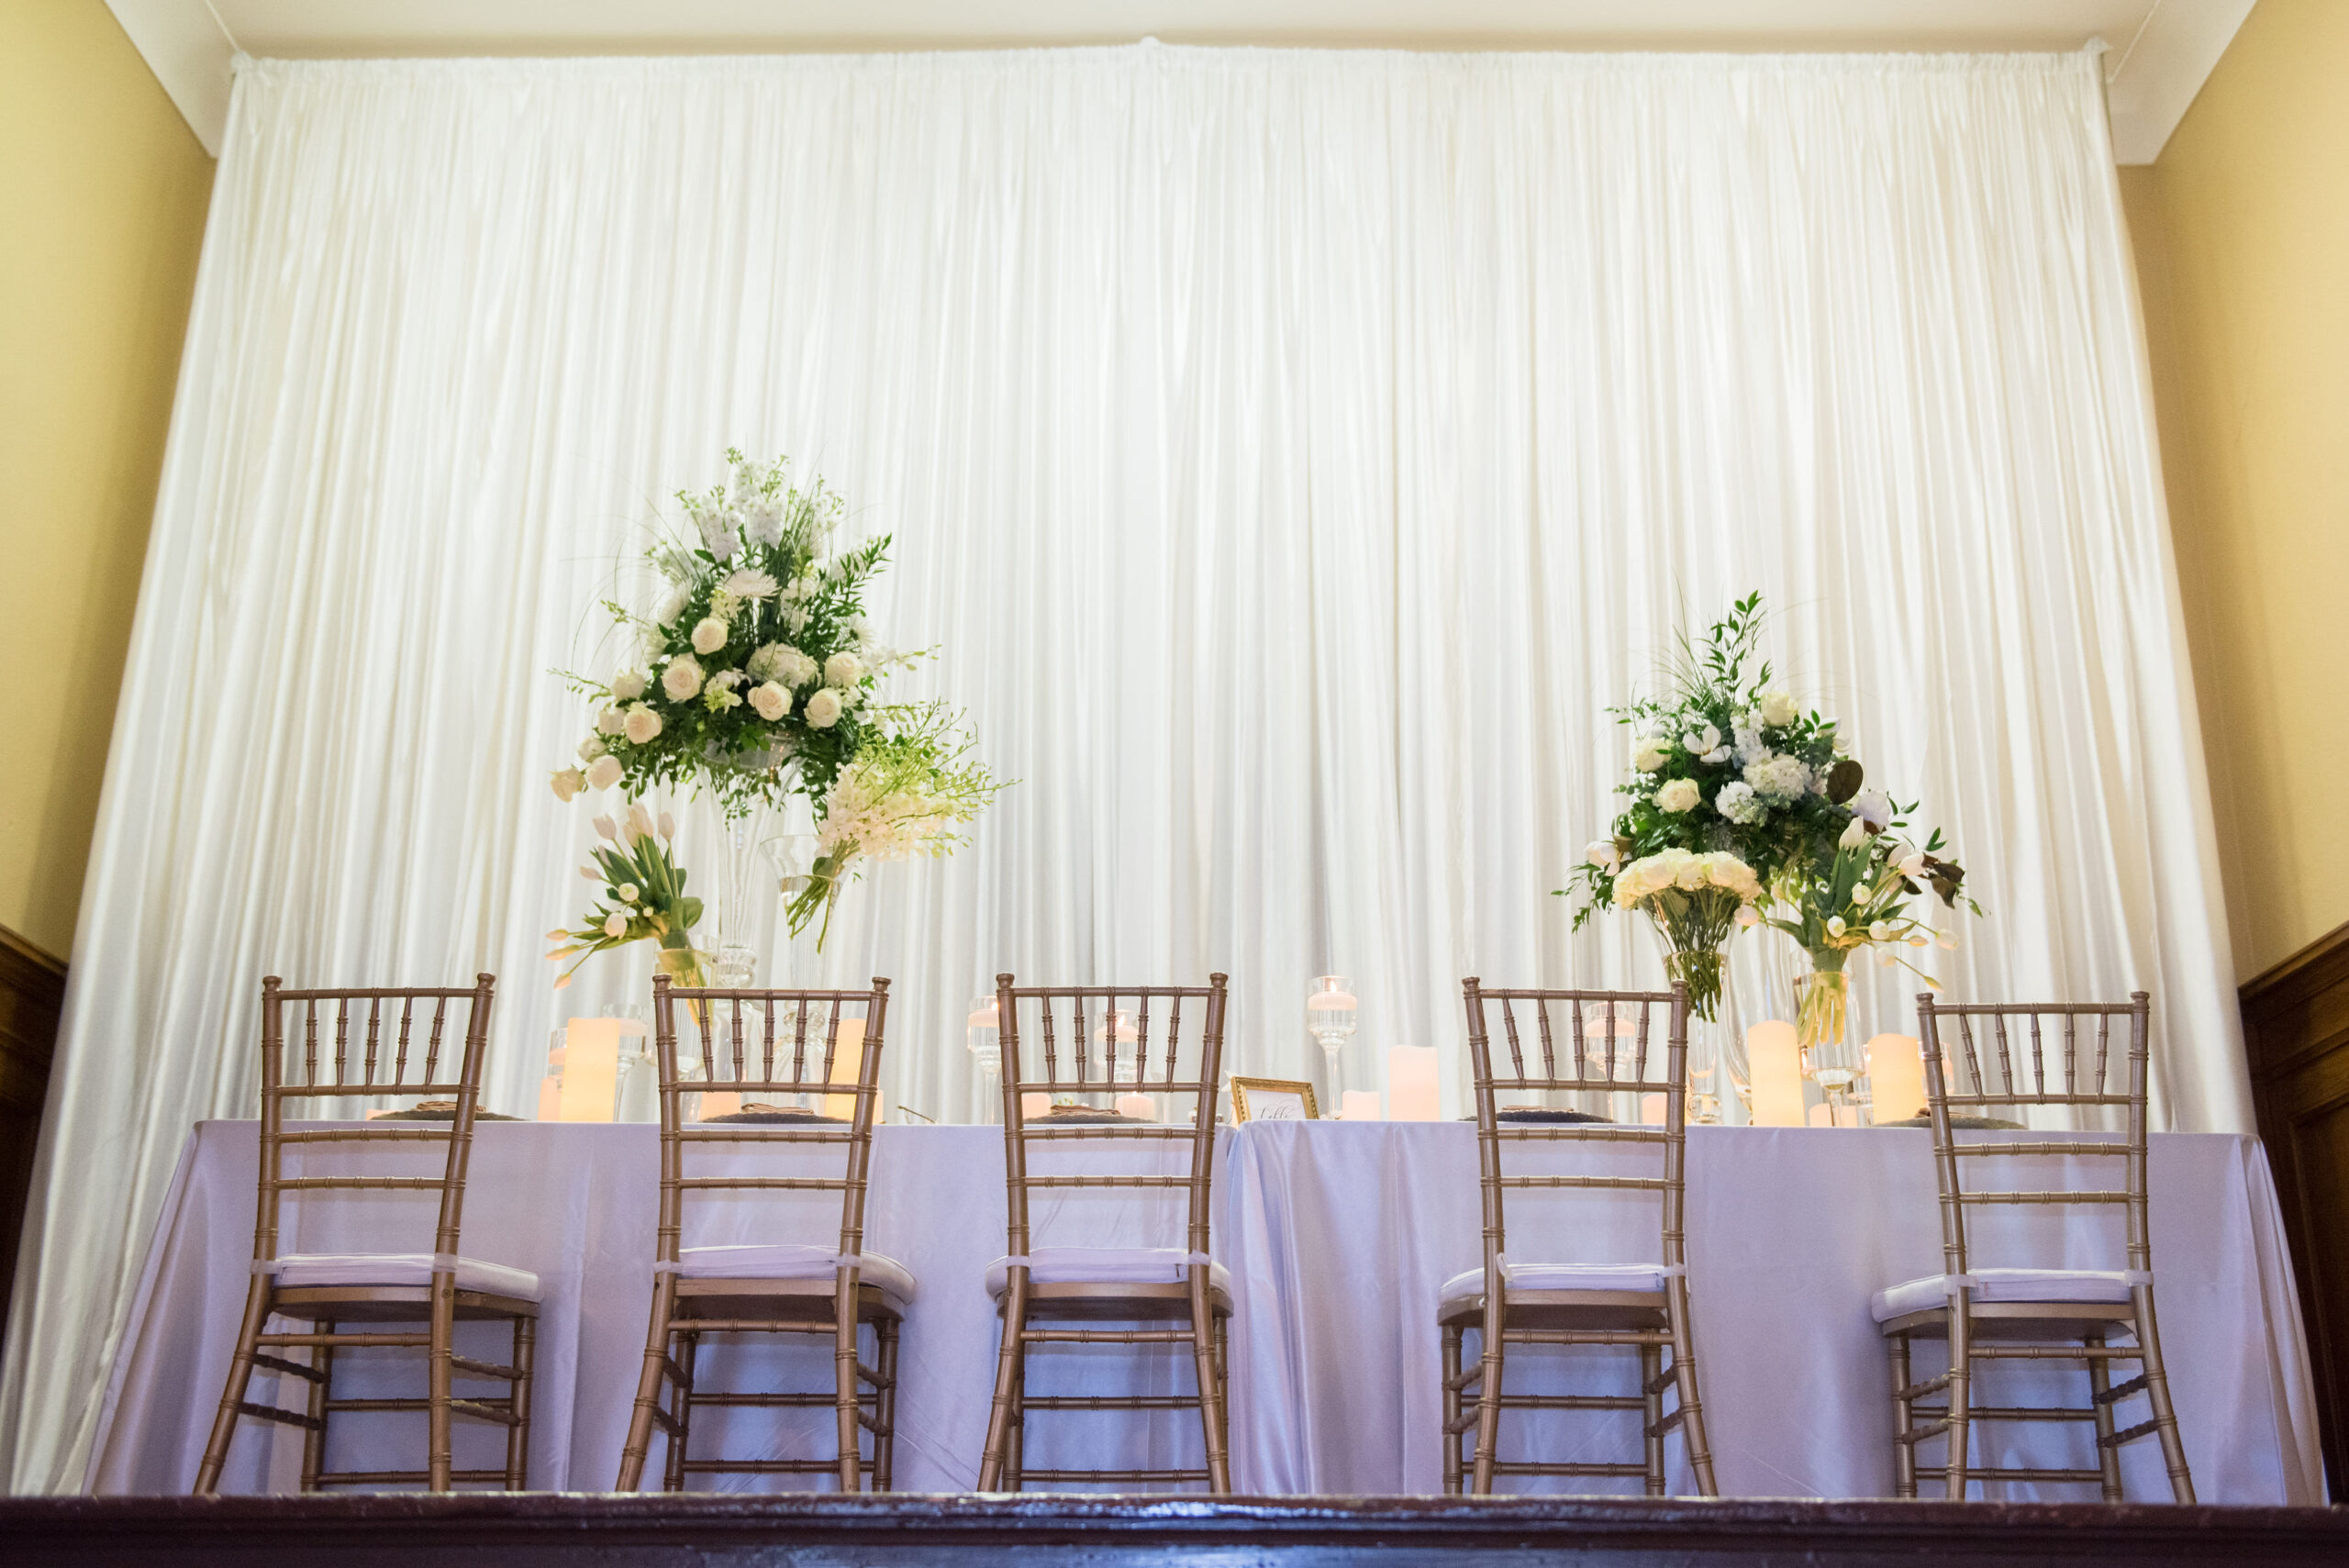 Gold Chaivari Chairs with White Drapping and Tall Centerpieces | Elegant White and Gold Wedding Reception Ideas